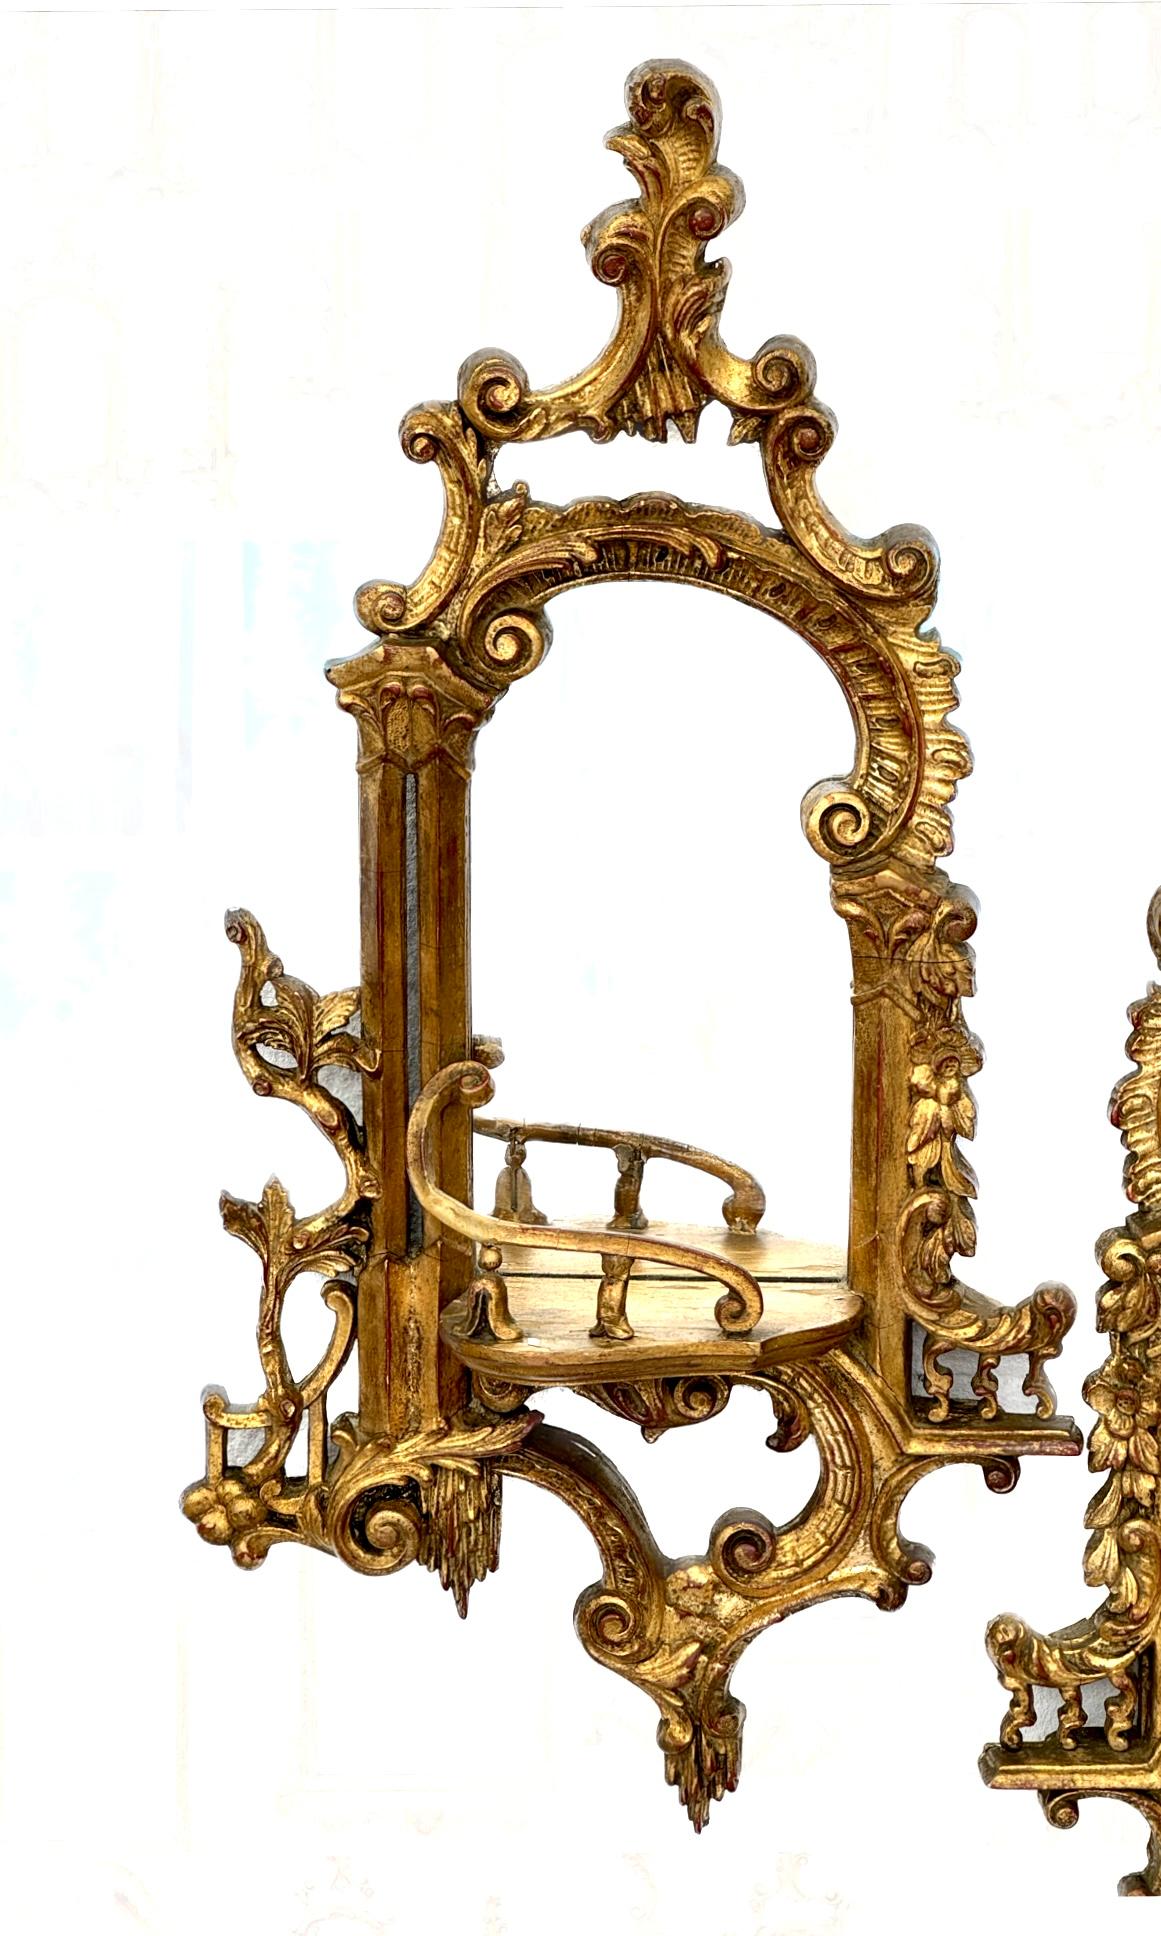 Pair of 19th Century Chinese Chippendale giltwood and plaster mirrored wall brackets. Brackets feature classical Chinese Chippendale style scrolled foliate gilt decoration with mirrored backs.